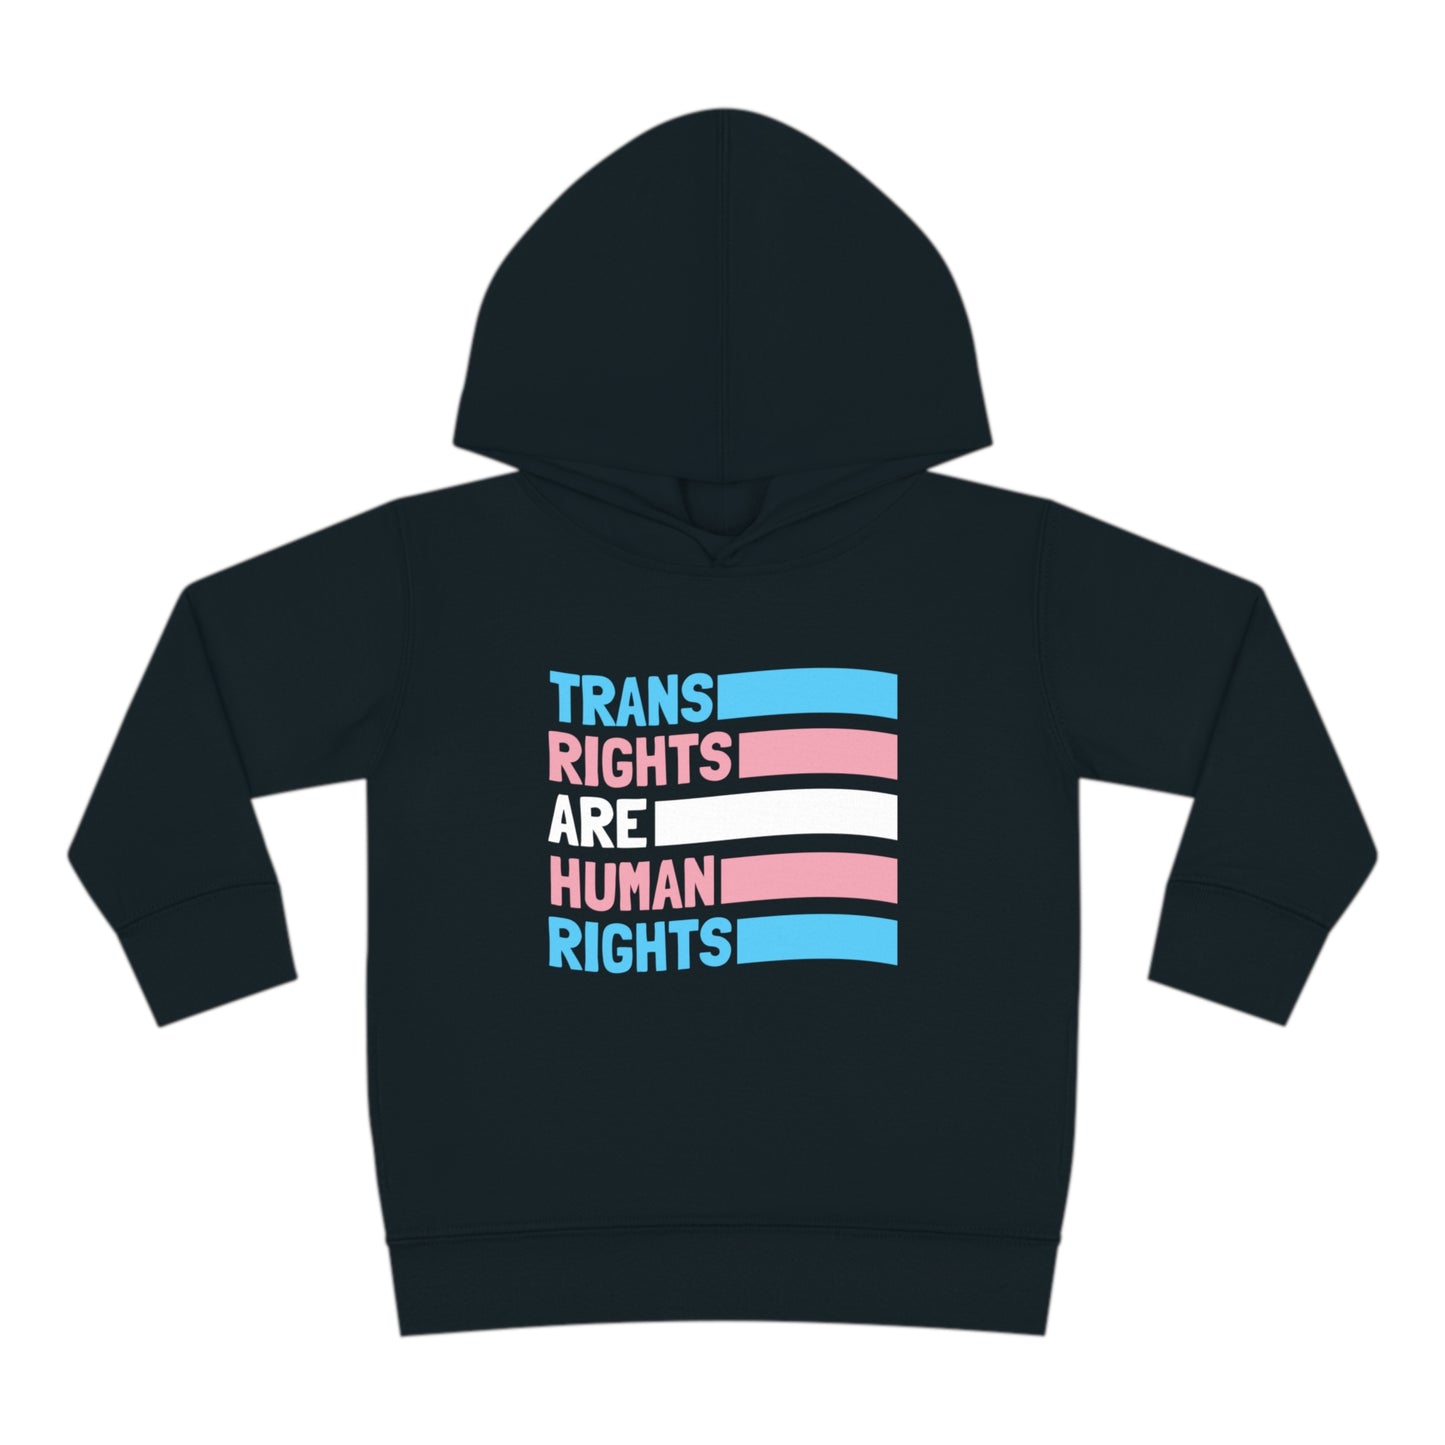 “Trans Rights Are Human Rights” Toddler Hoodie